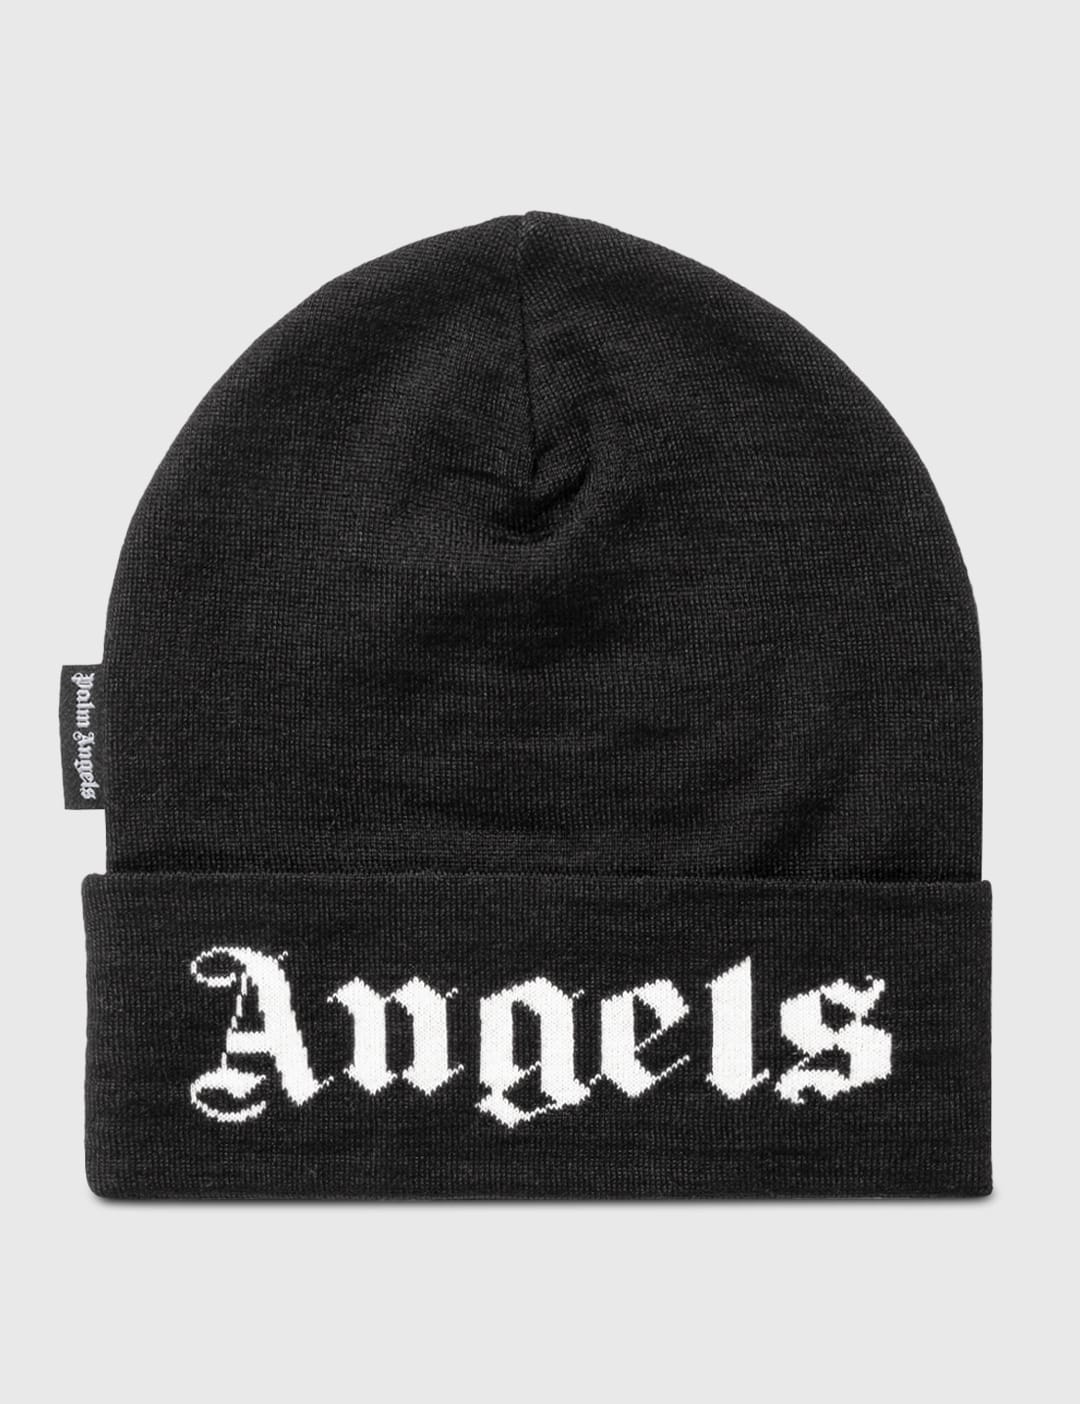 Palm Angels - Palm Angels Beanie | HBX - Globally Curated Fashion